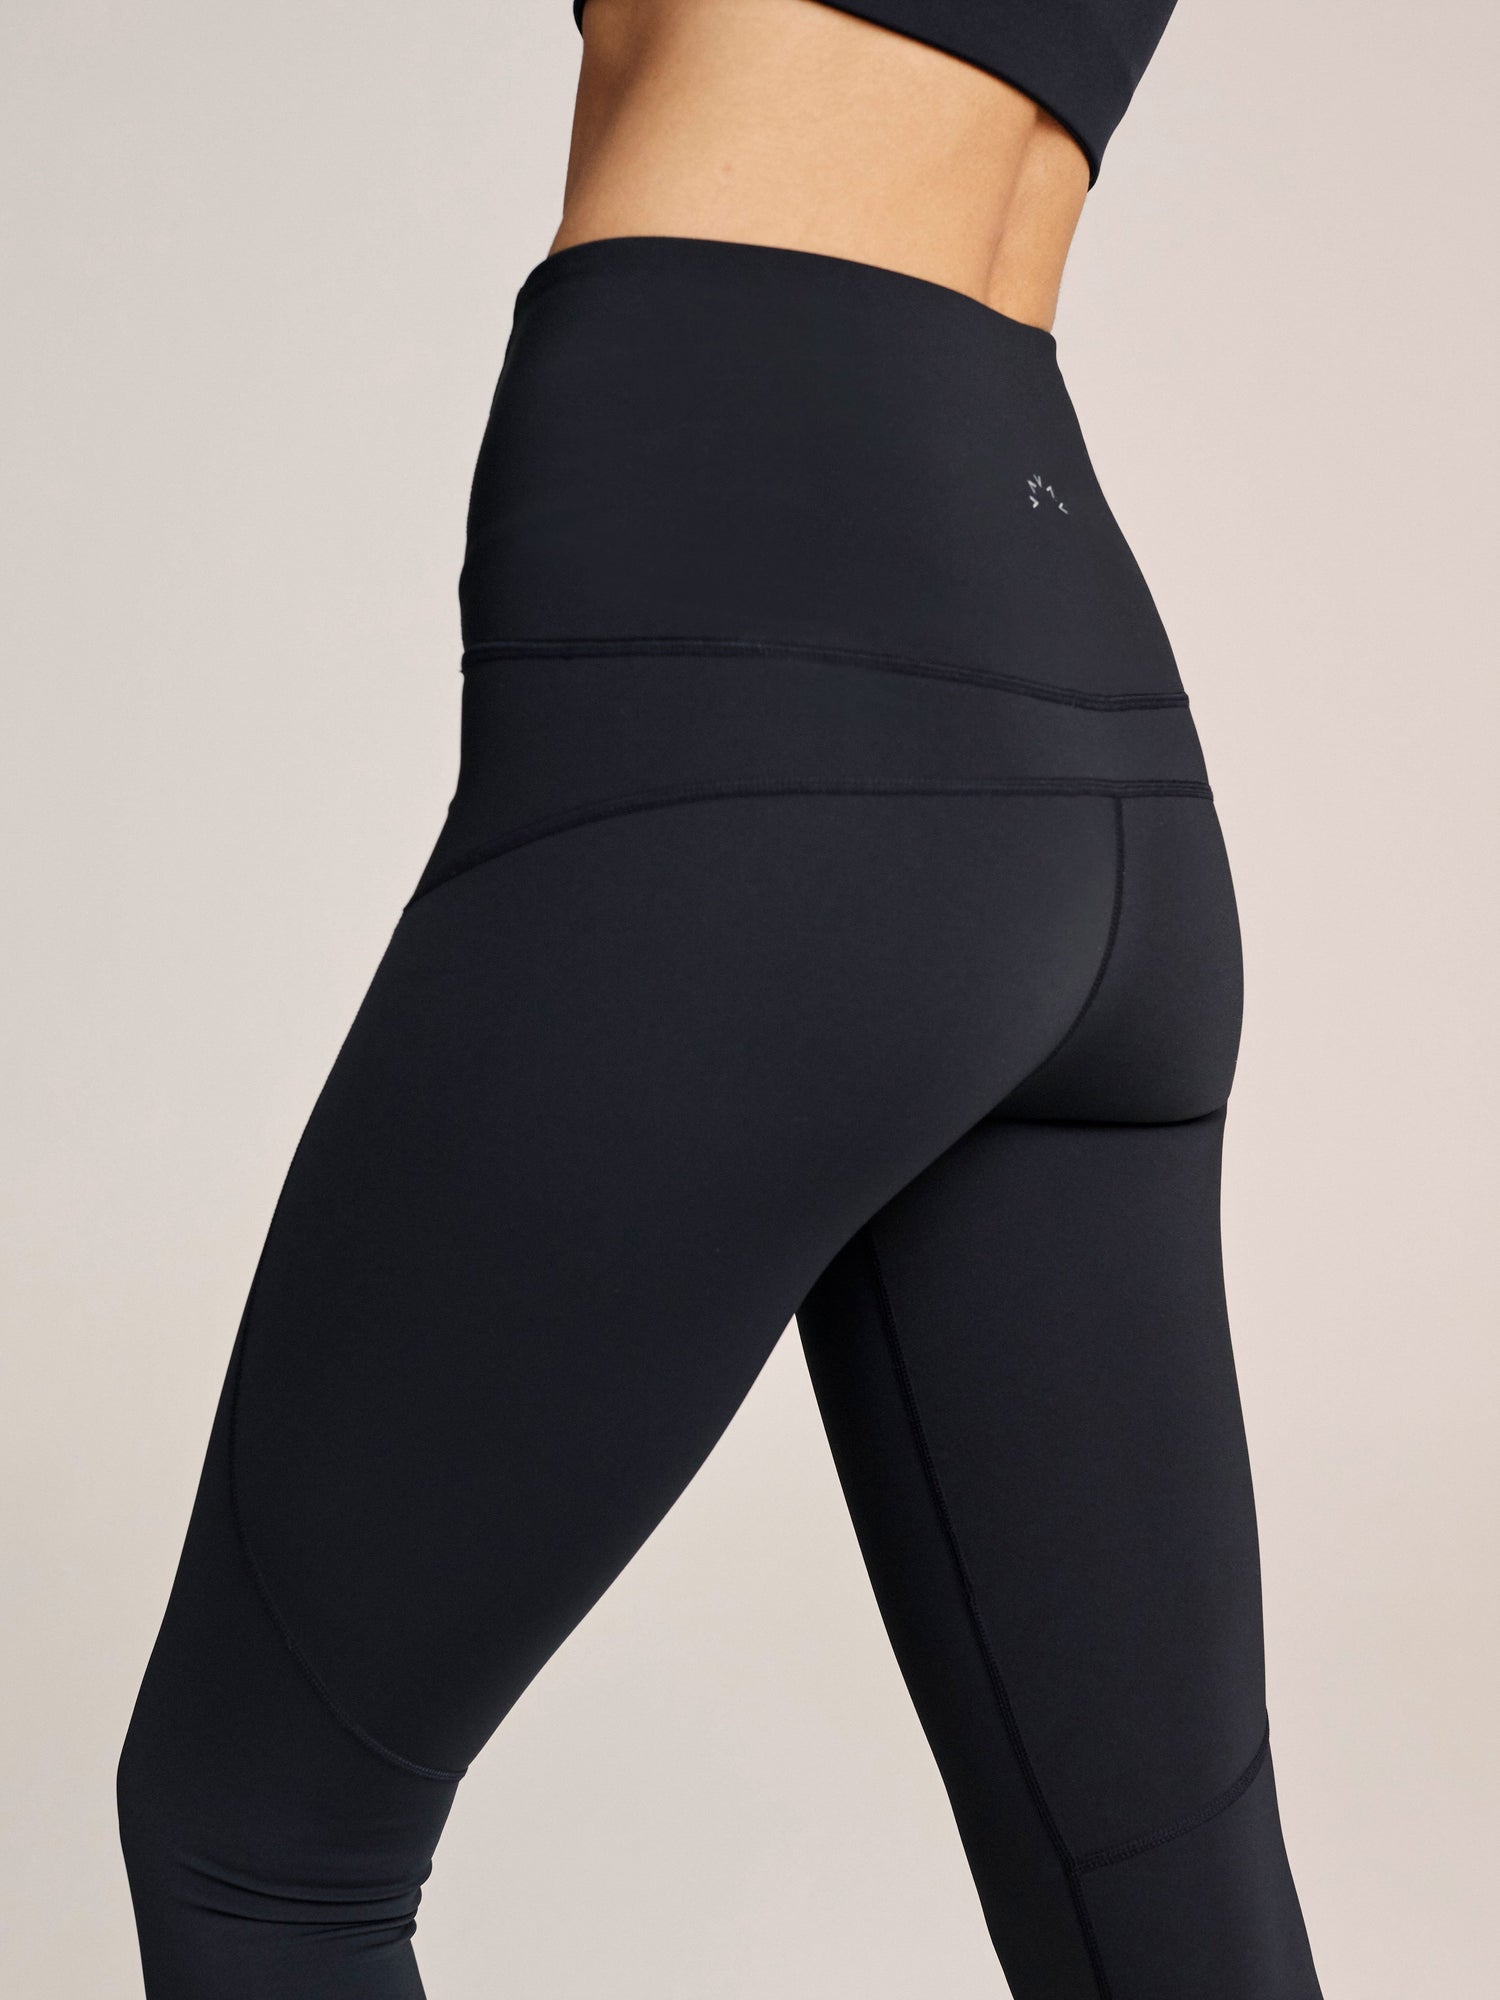 Wesley in Black | Super High-Rise 7/8 Length Legging with Reflective ...